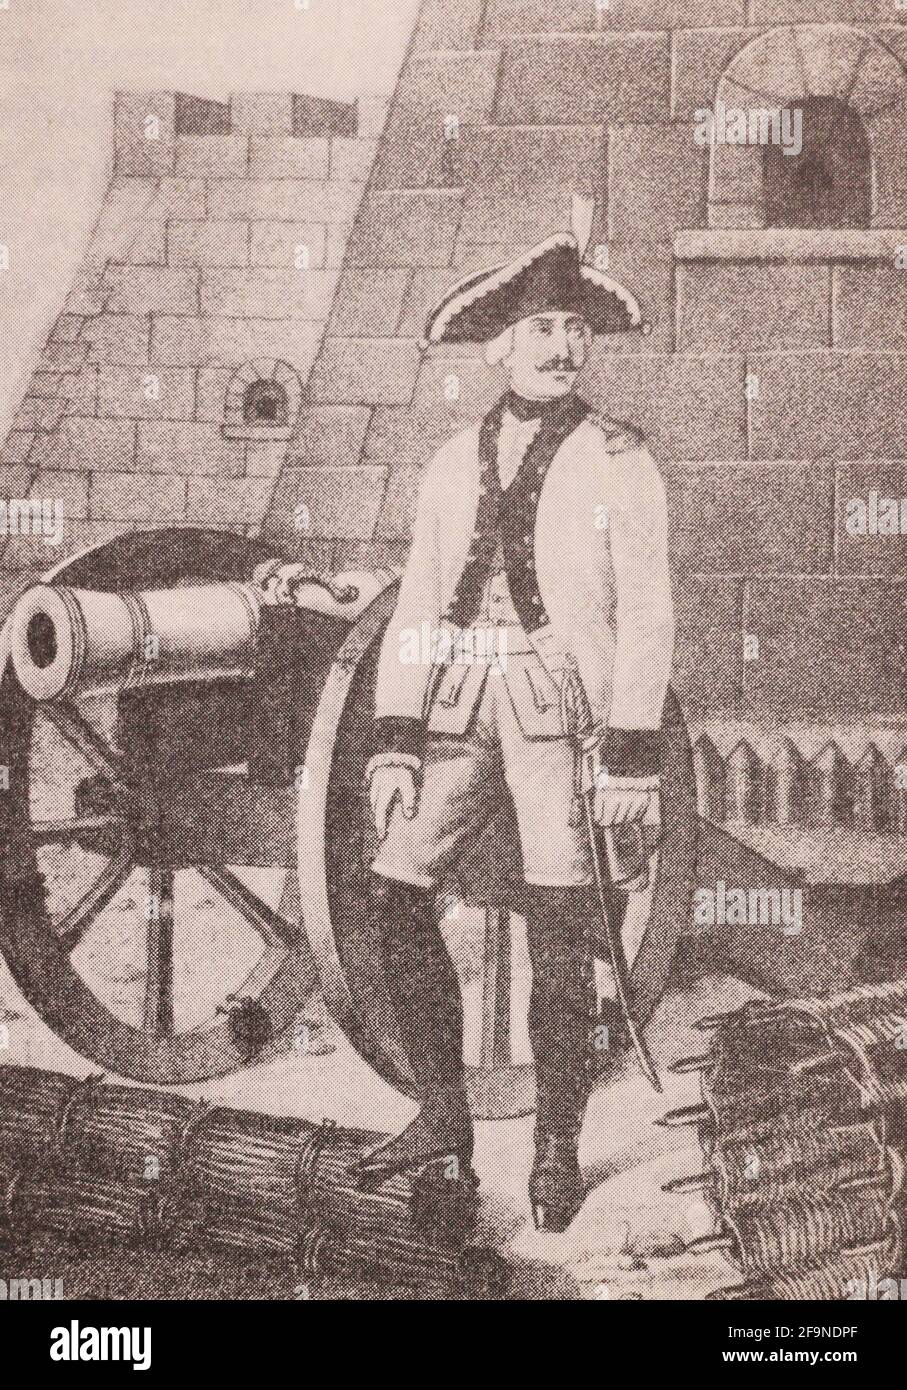 Artilleryman of the Landmilitz Infantry Regiment from 1763 to 1770. The engraving of the 19th century. Stock Photo